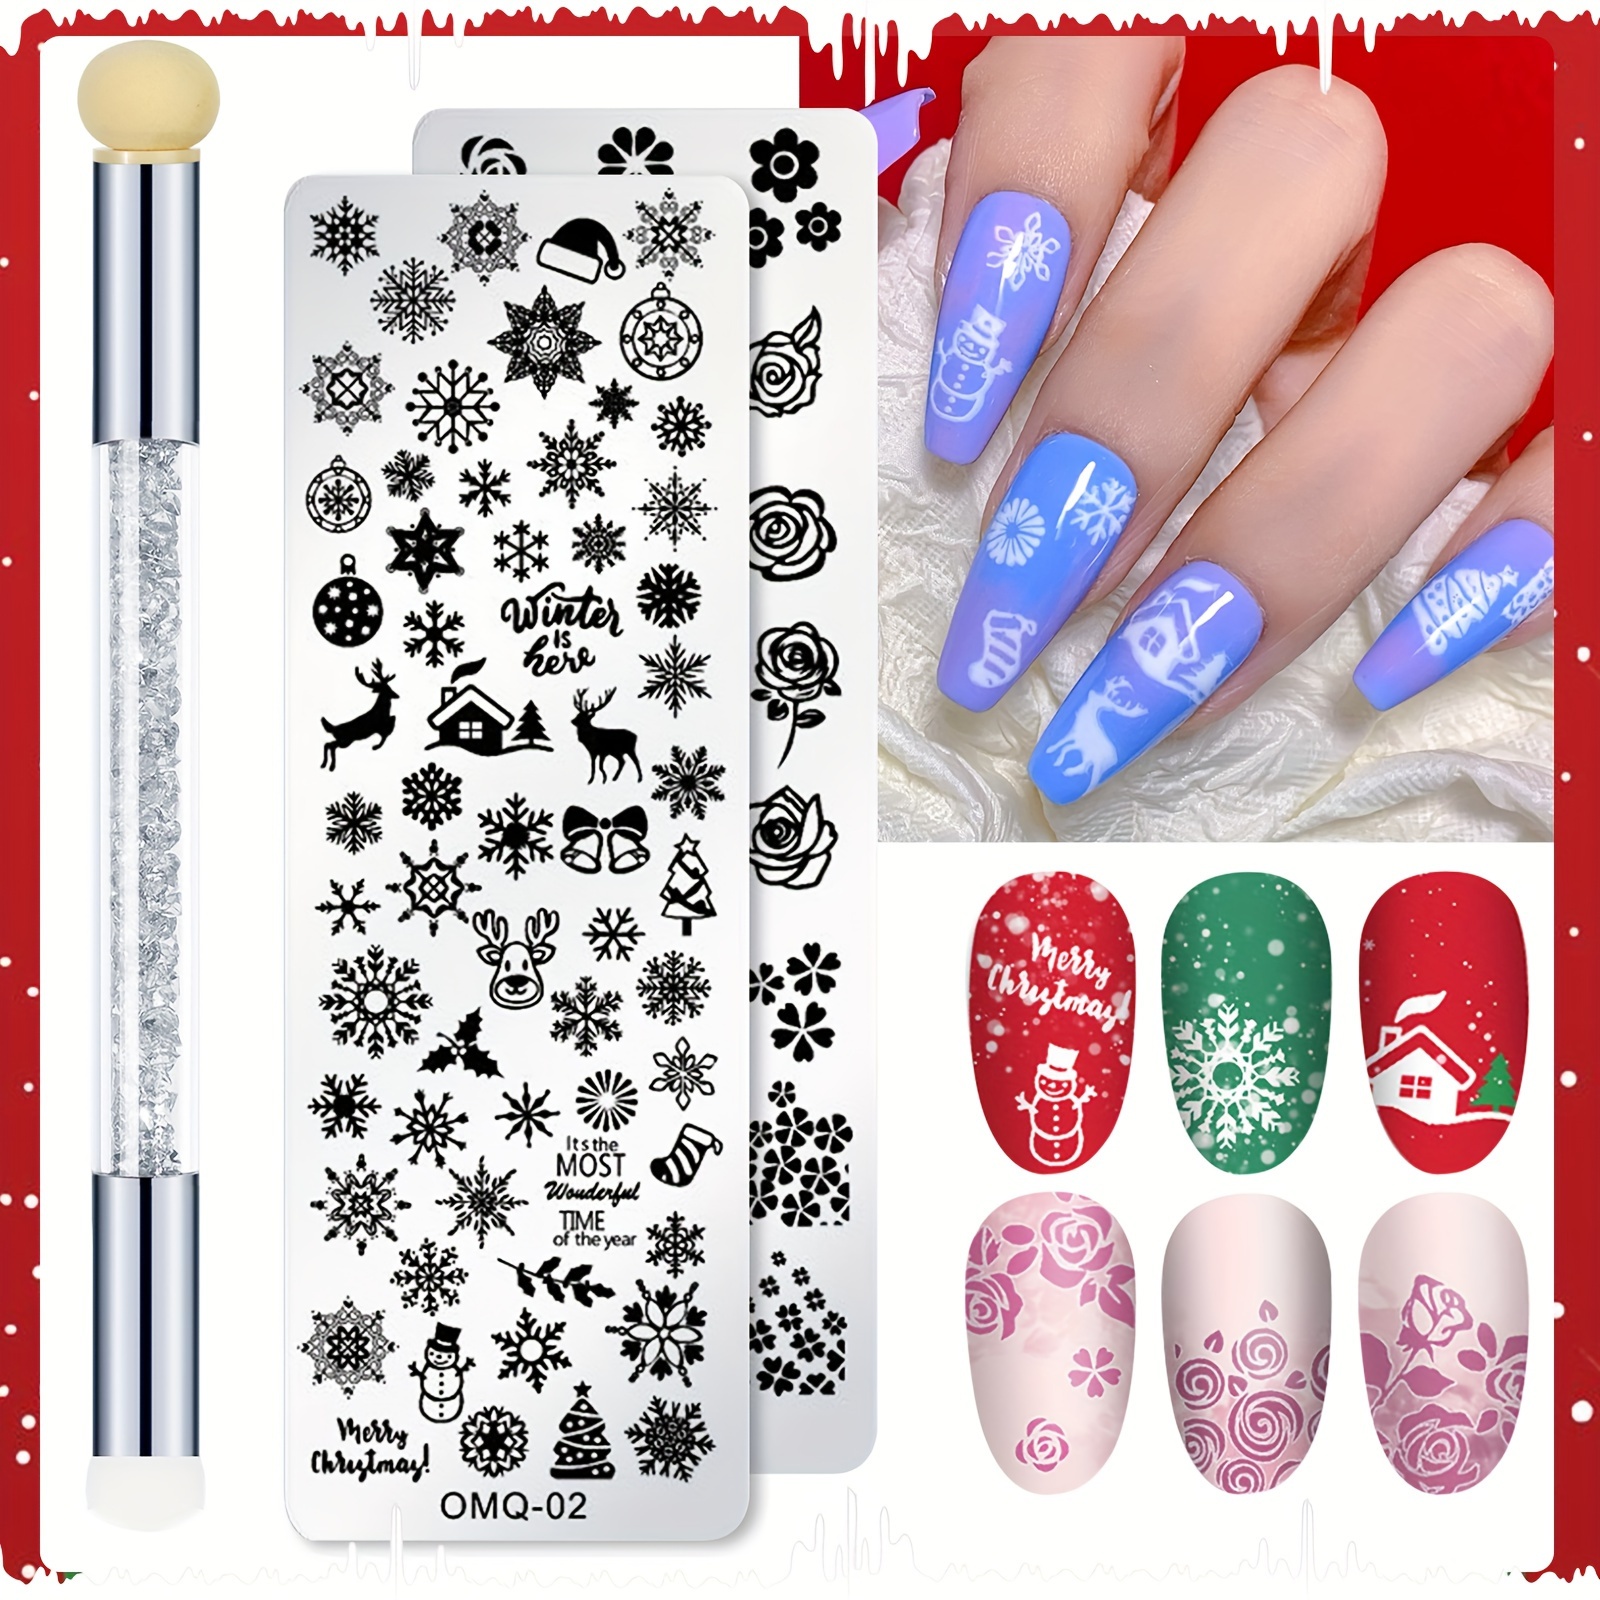 Transparent Silicone Nail Art Stamping Kit Clear Silicone Nail